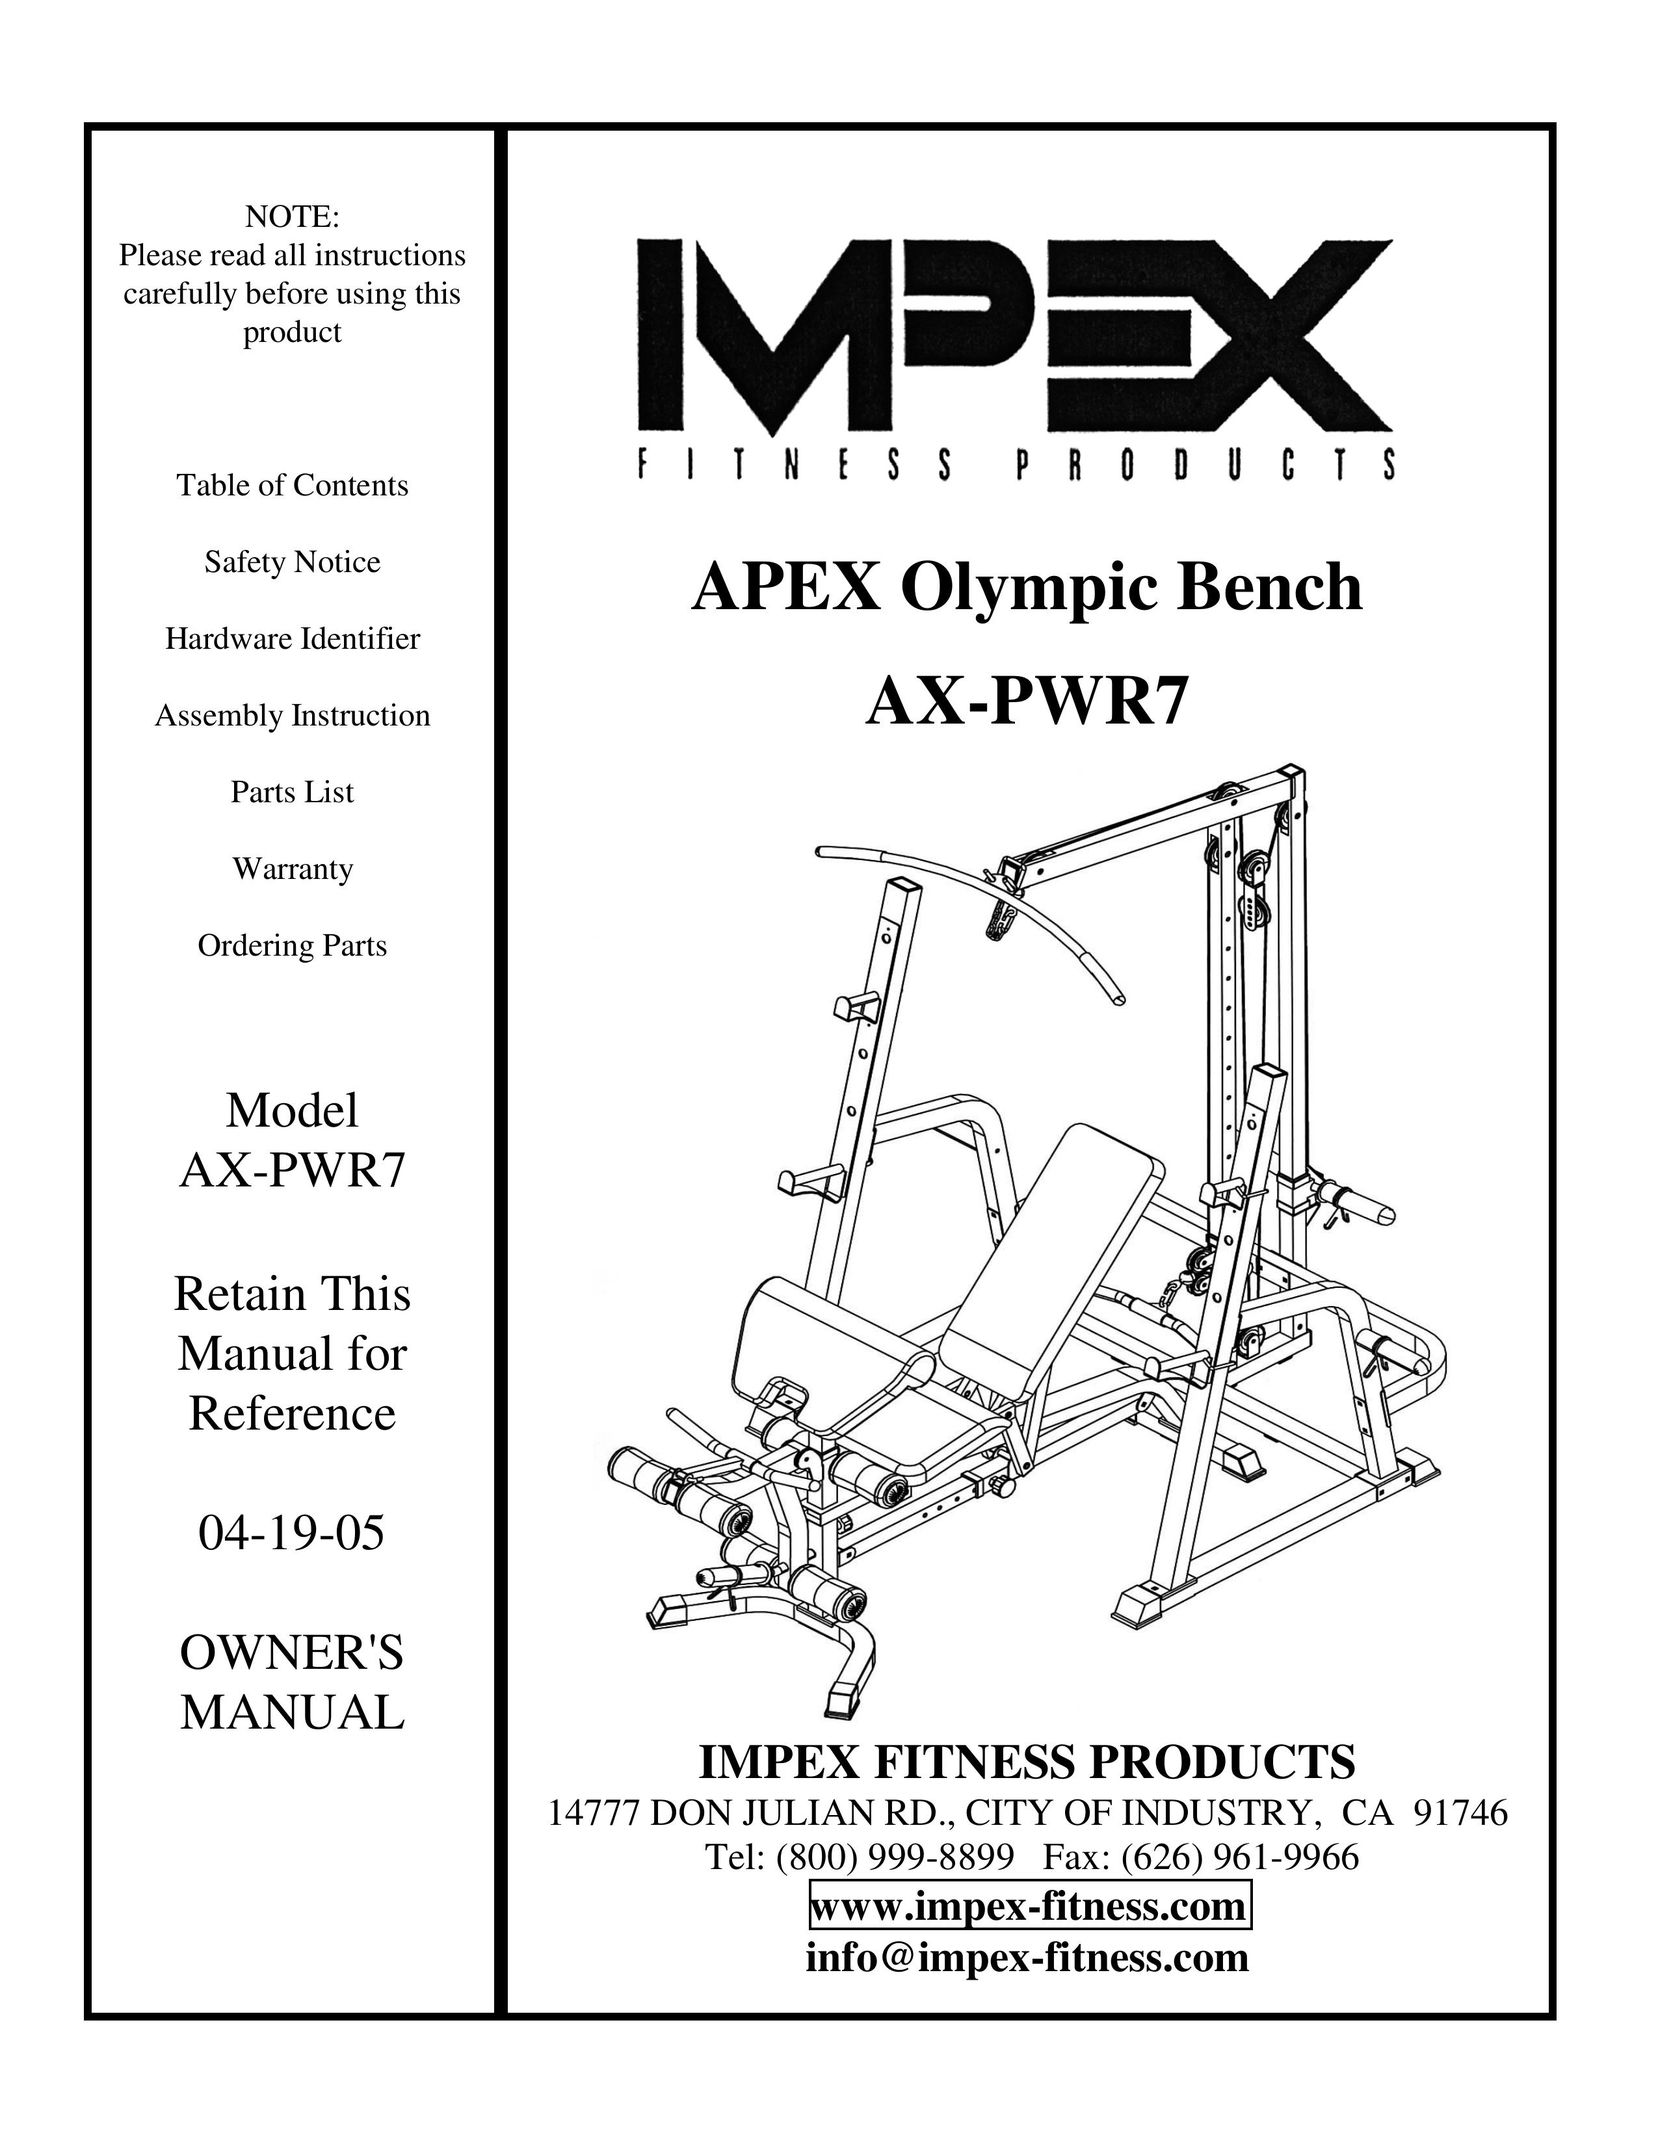 Impex AX-PWR7 Home Gym User Manual